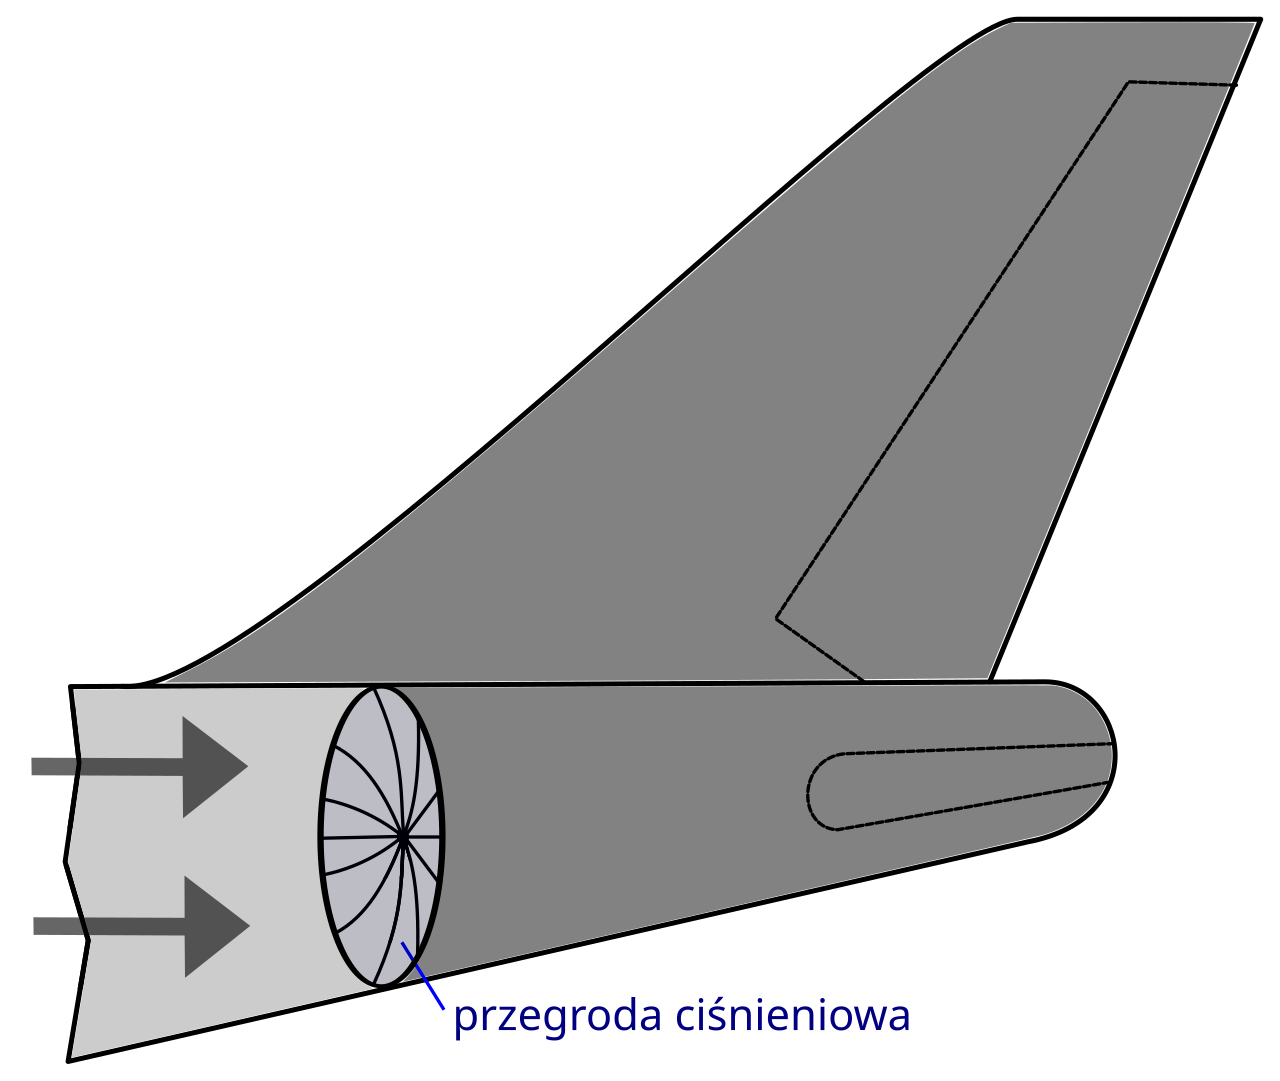 Illustration showing the location of the pressure bulkhead in a 747